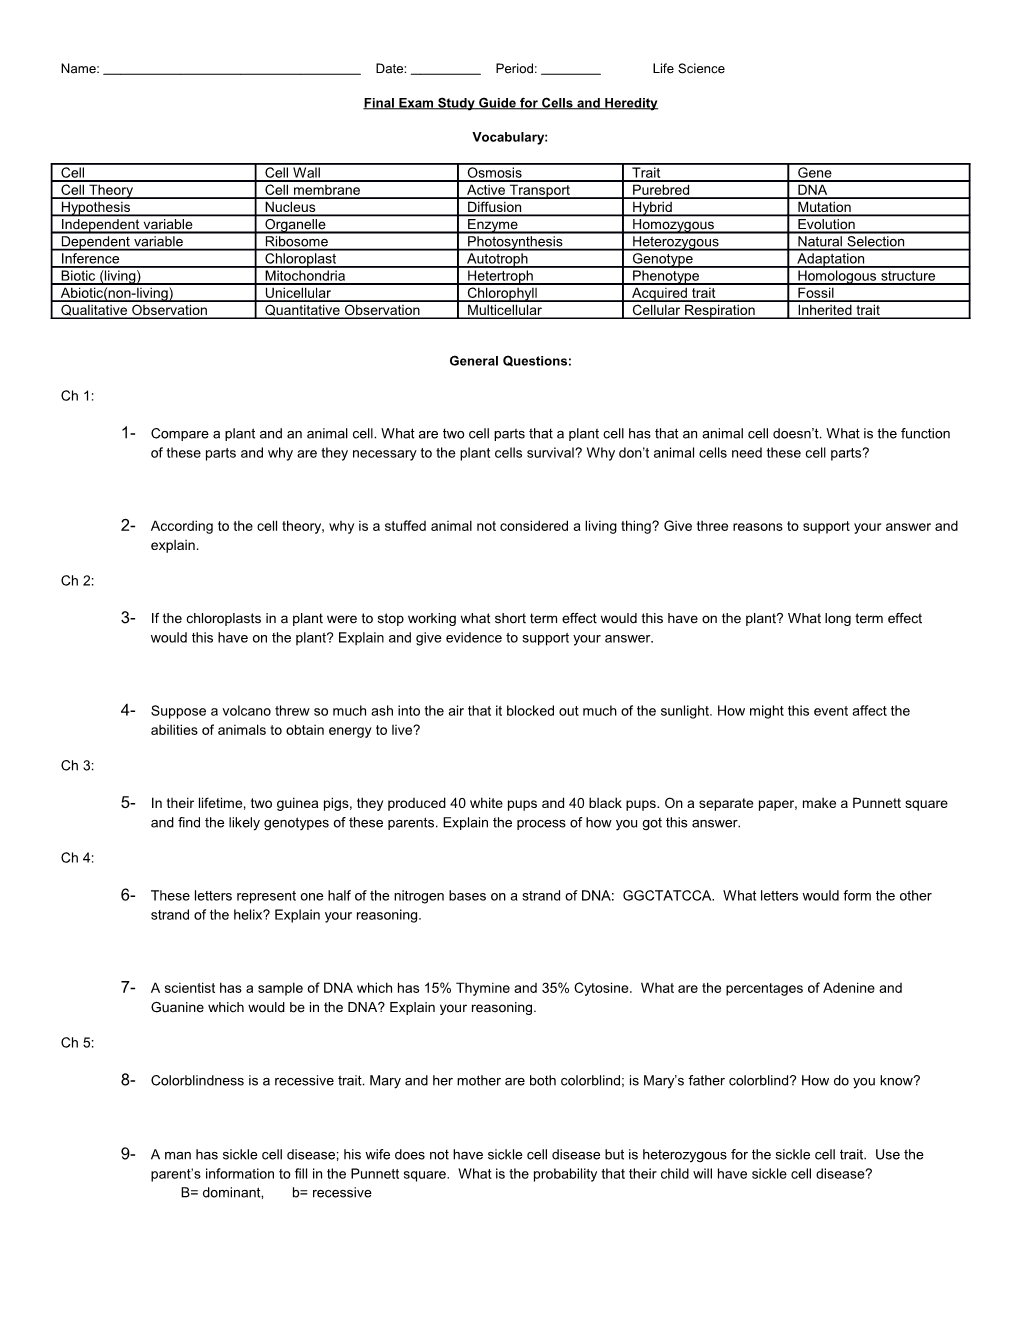 Final Exam Study Guide for Cells and Heredity